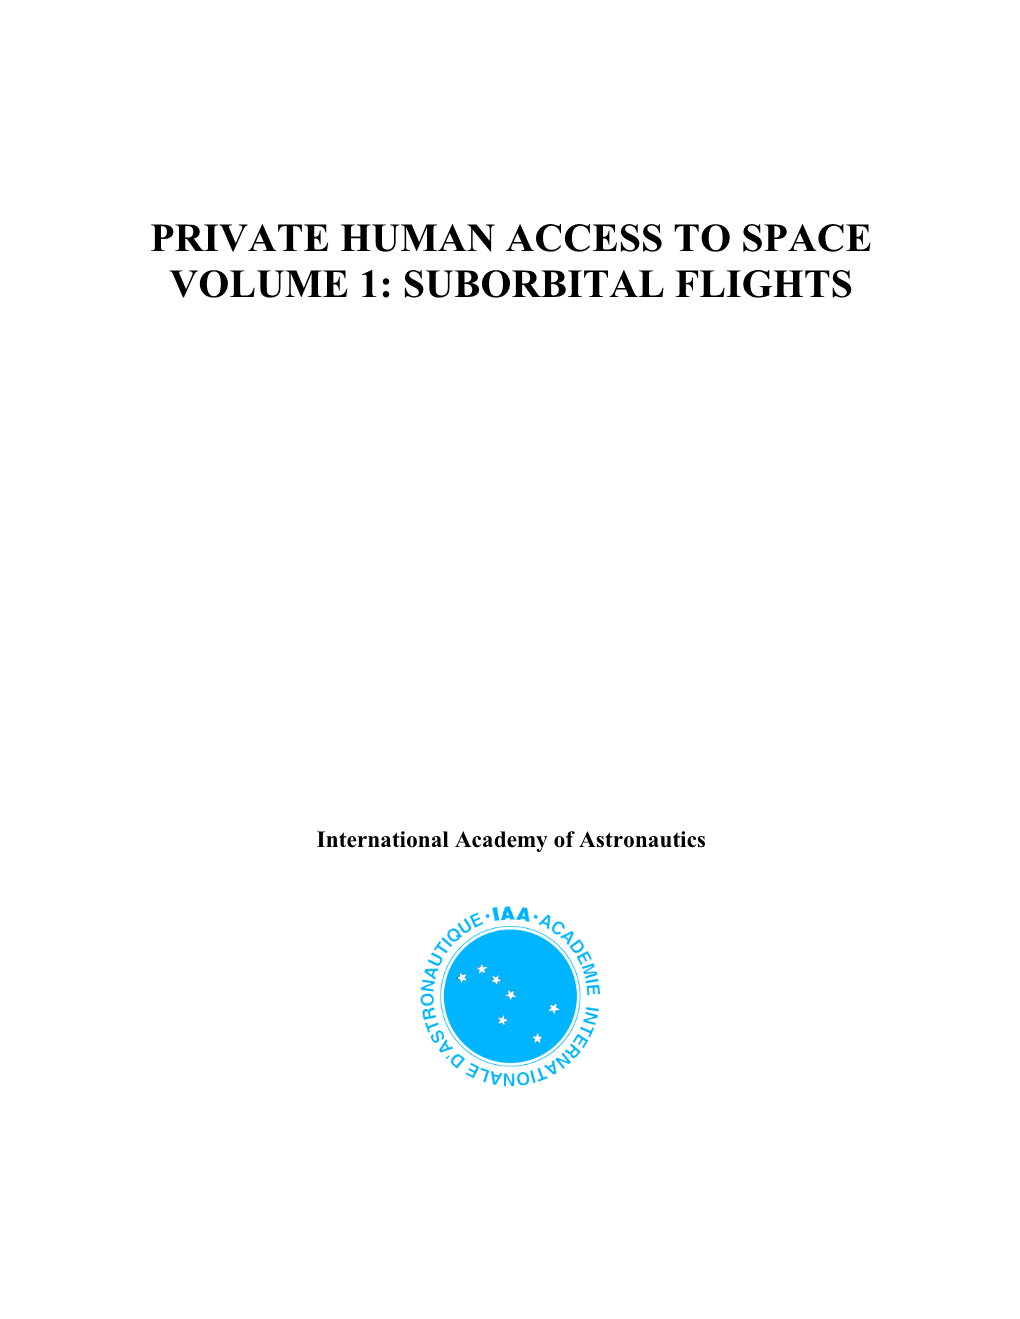 Private Human Access to Space Volume 1: Suborbital Flights